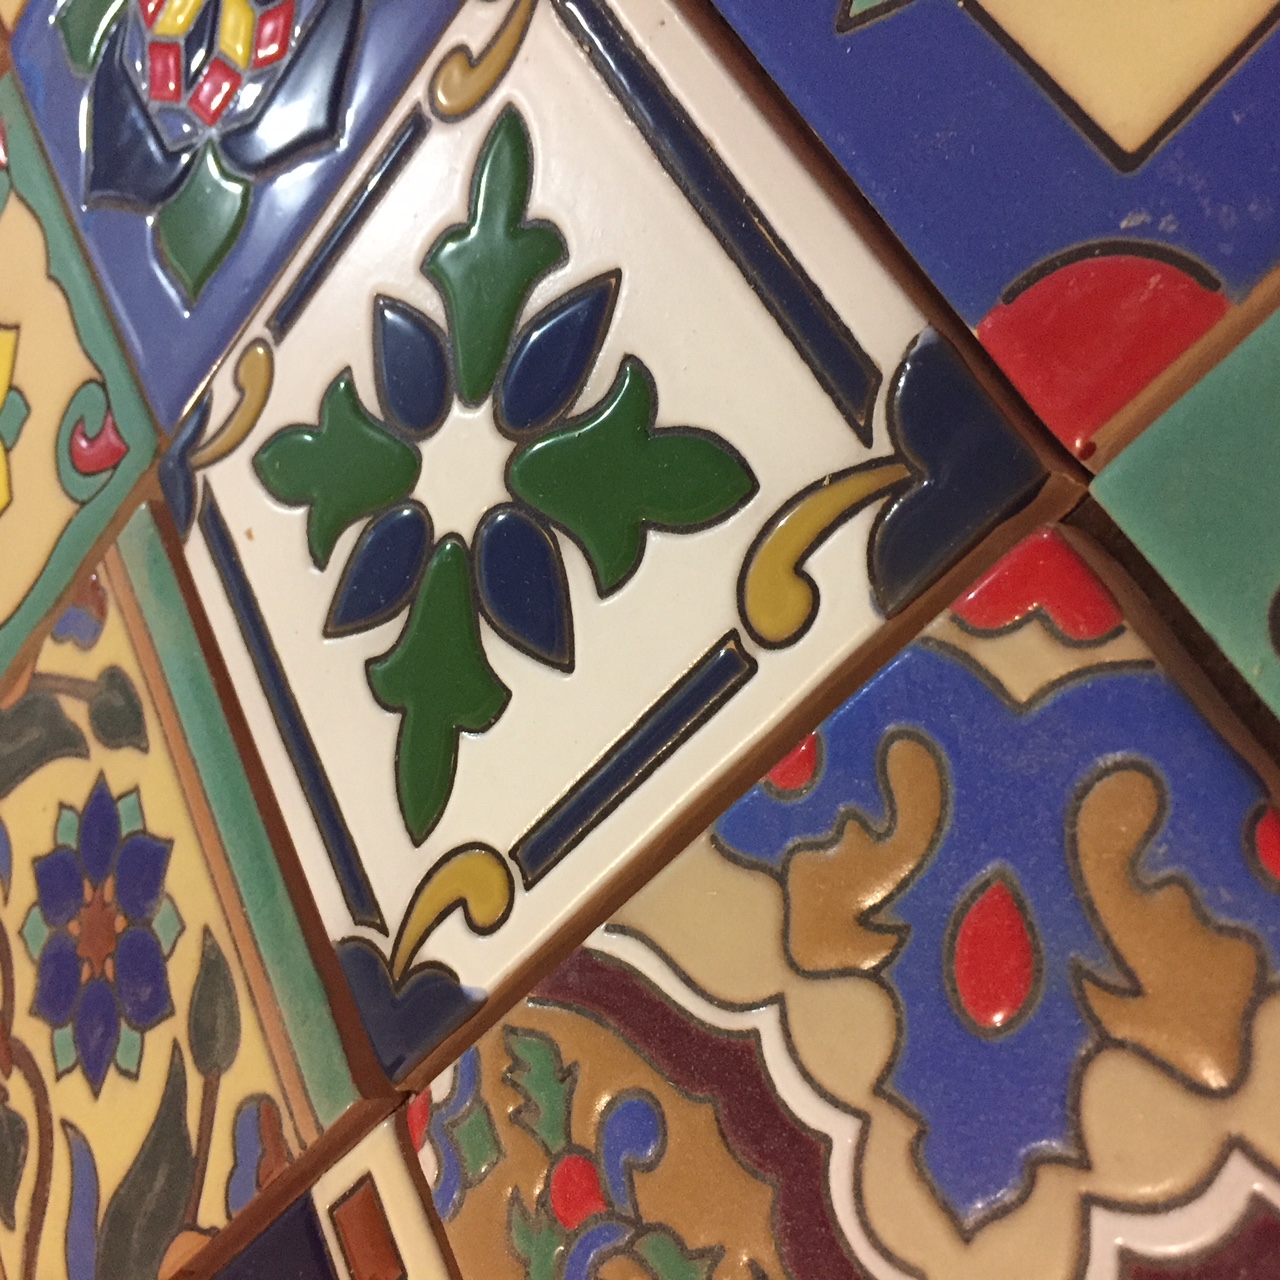 high relief tiles decorating stair risers in old european style